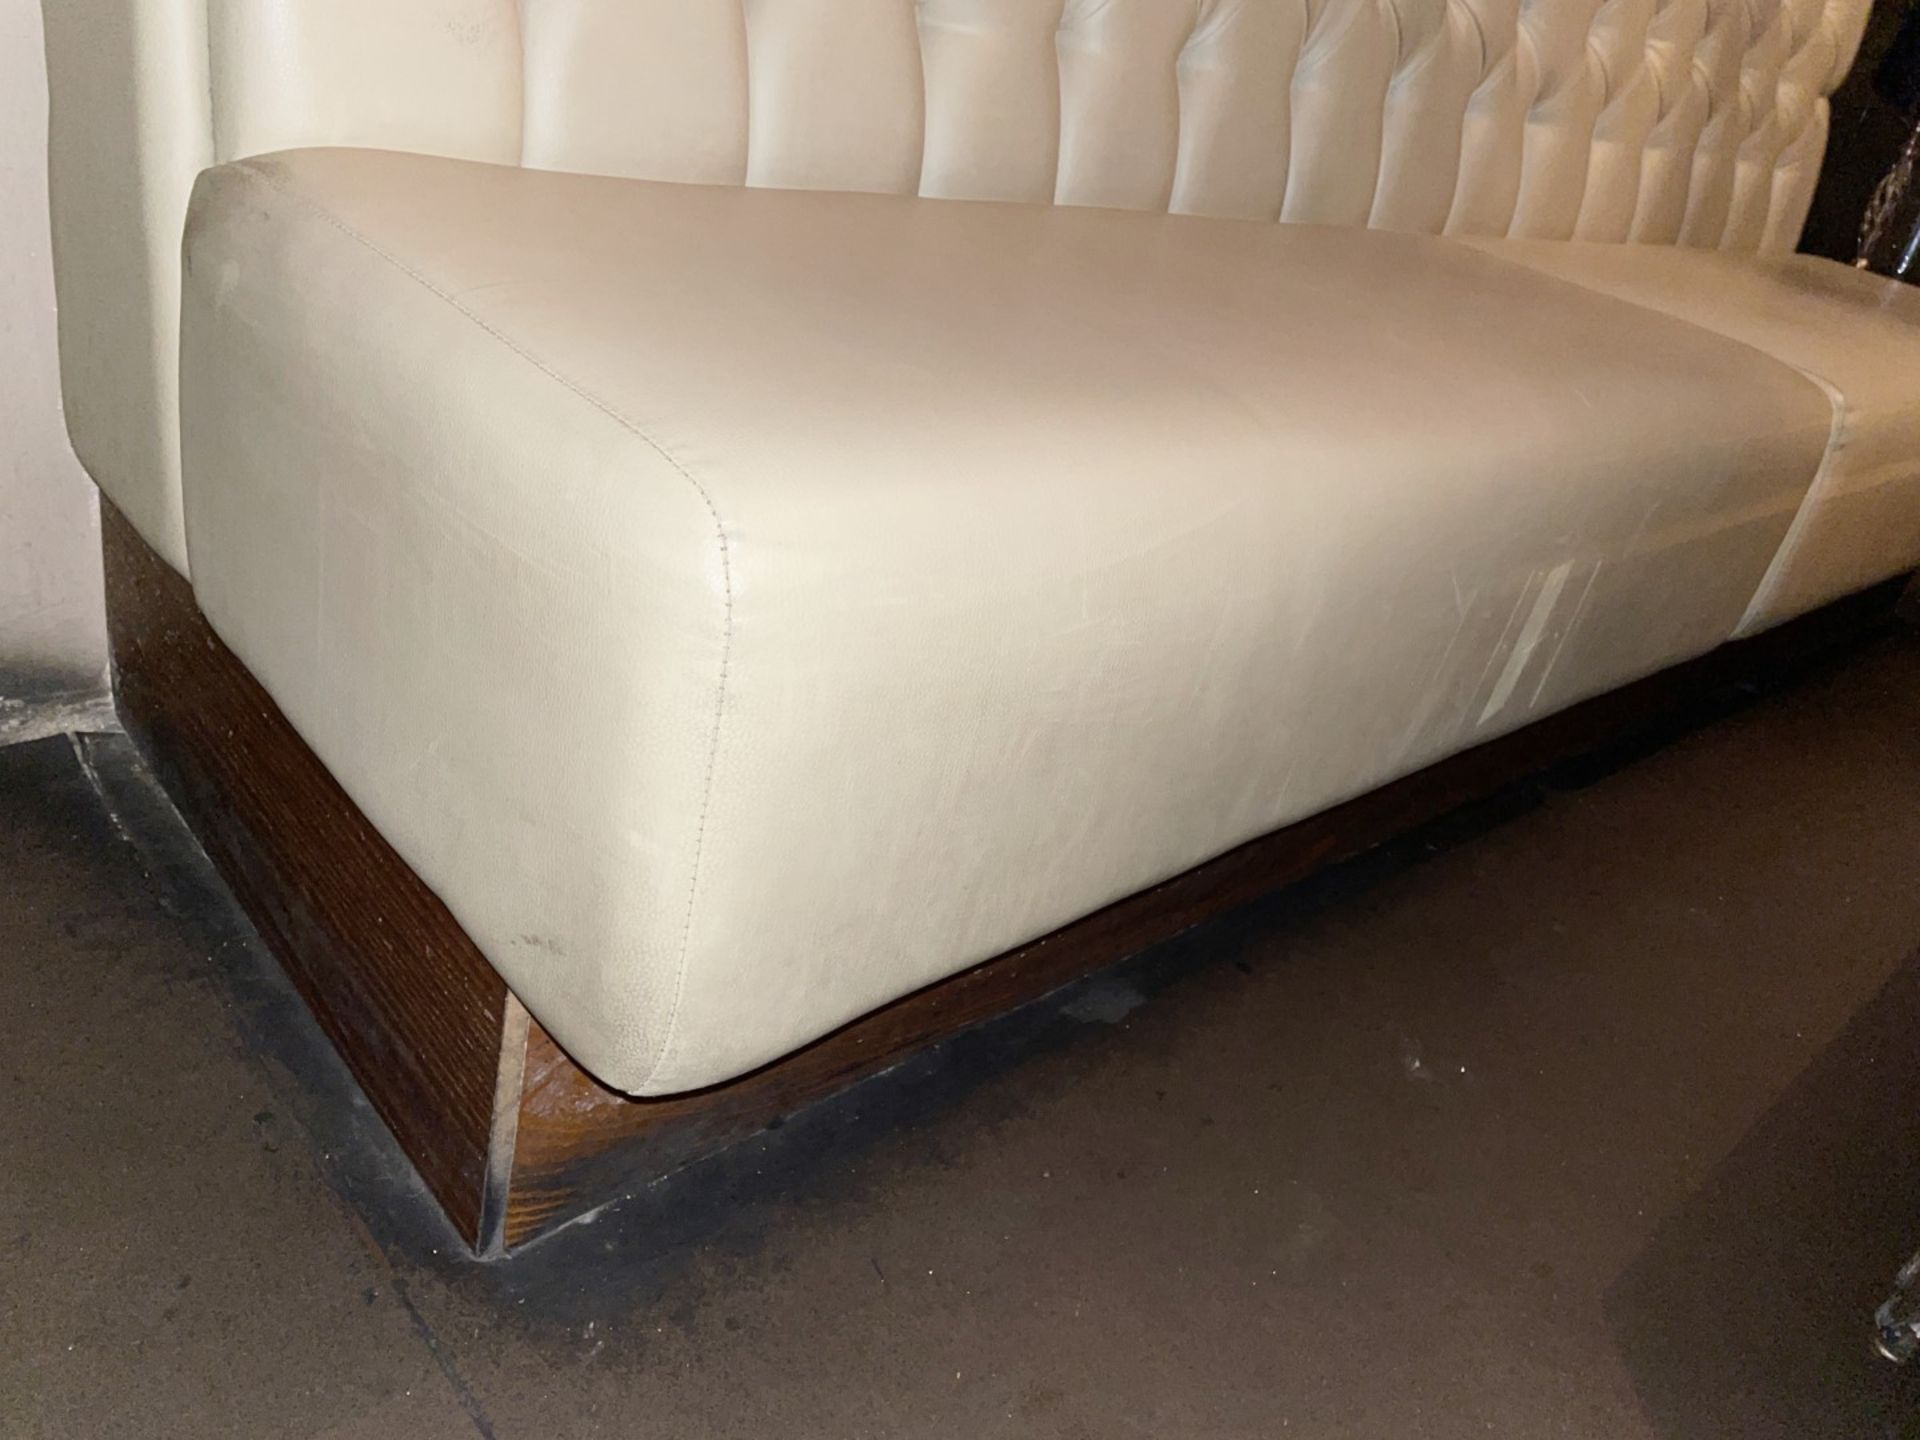 5 x Sections of Commercial Button Back Banquette Booth Seating Upholstered in a Cream Faux Leather - Image 5 of 14